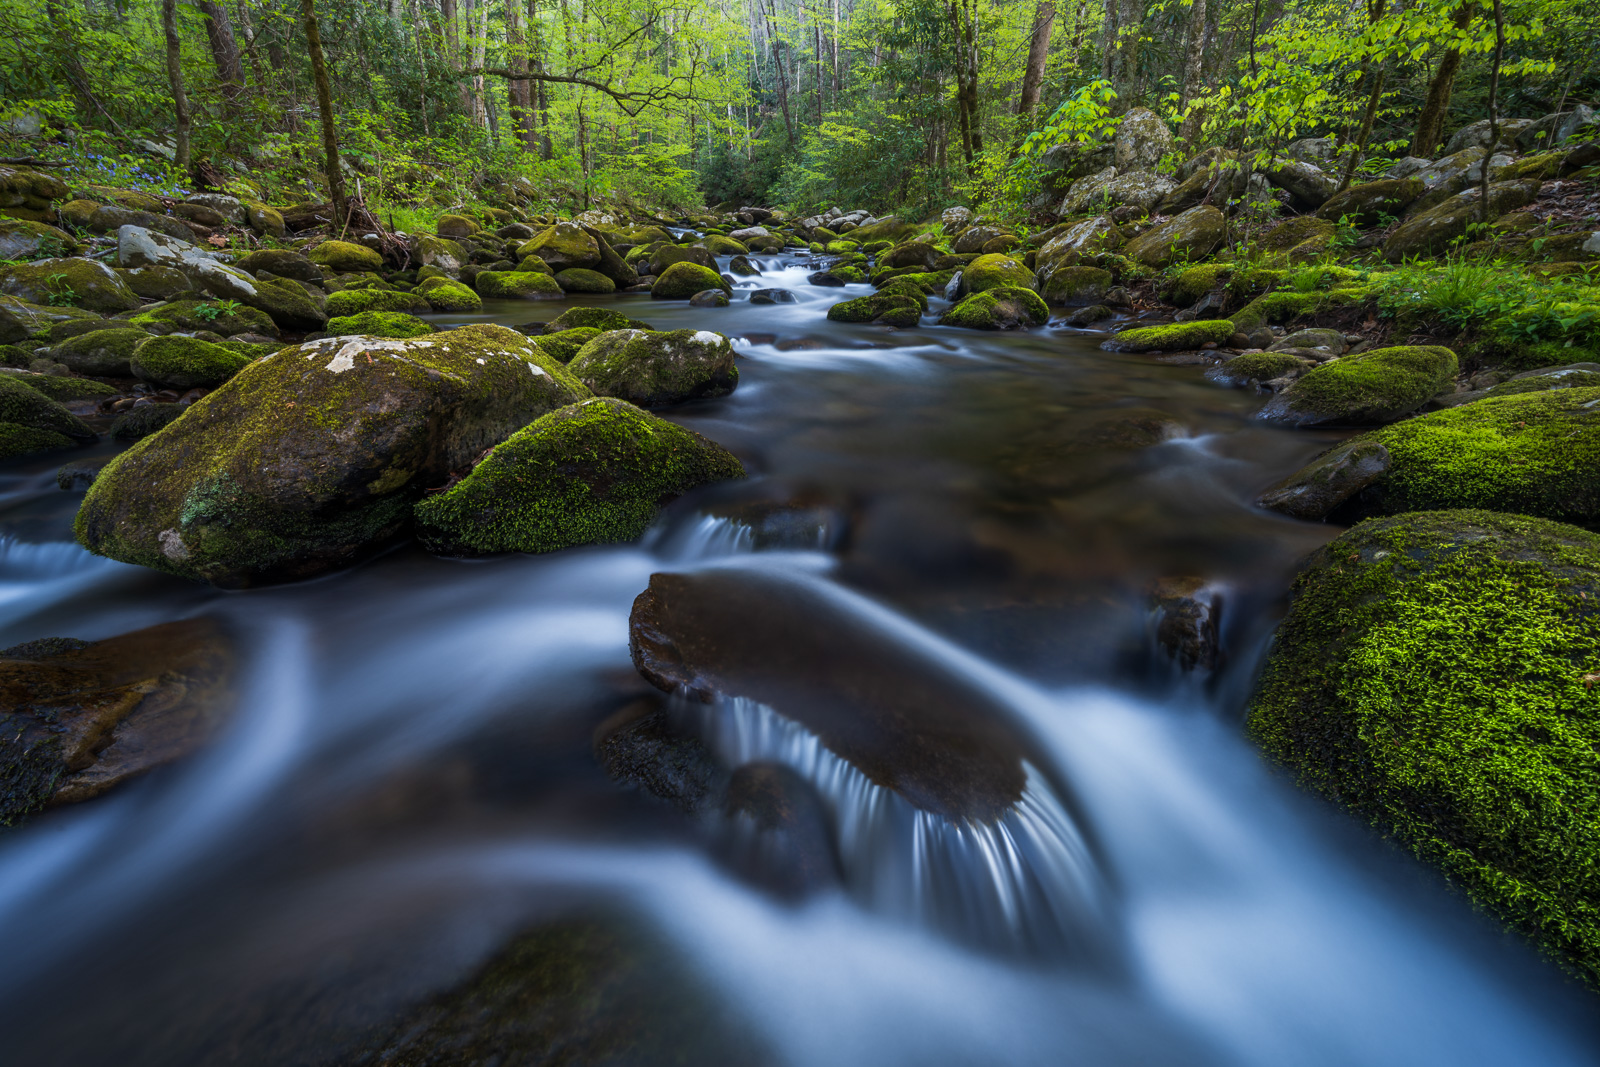 Spring flow on the Roaring Fork River in Great Smoky Mountains National Park. 